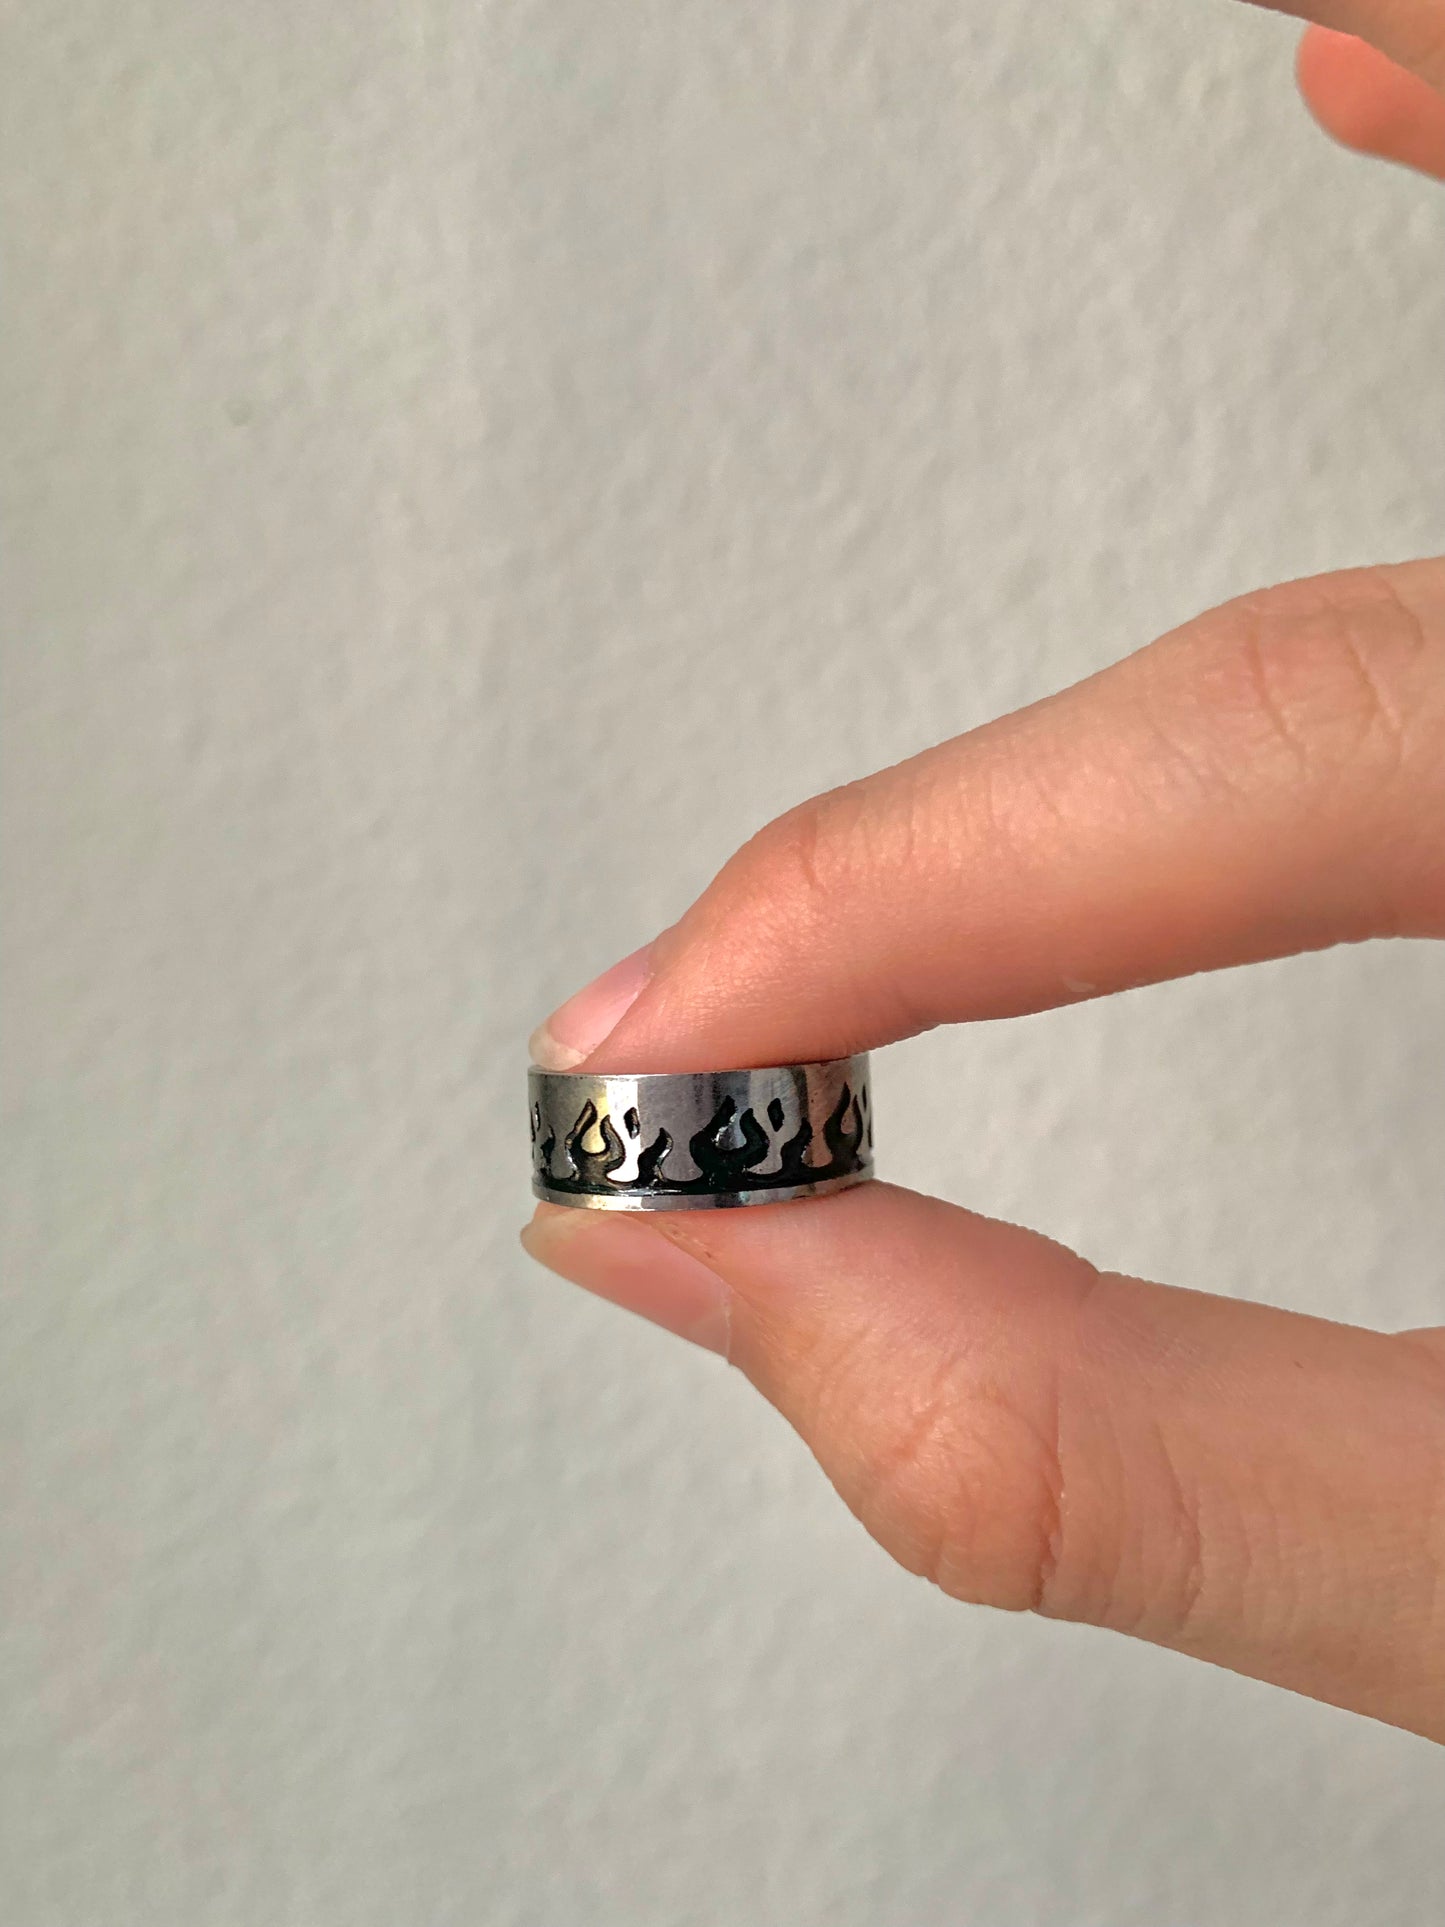 Flame anxiety ring